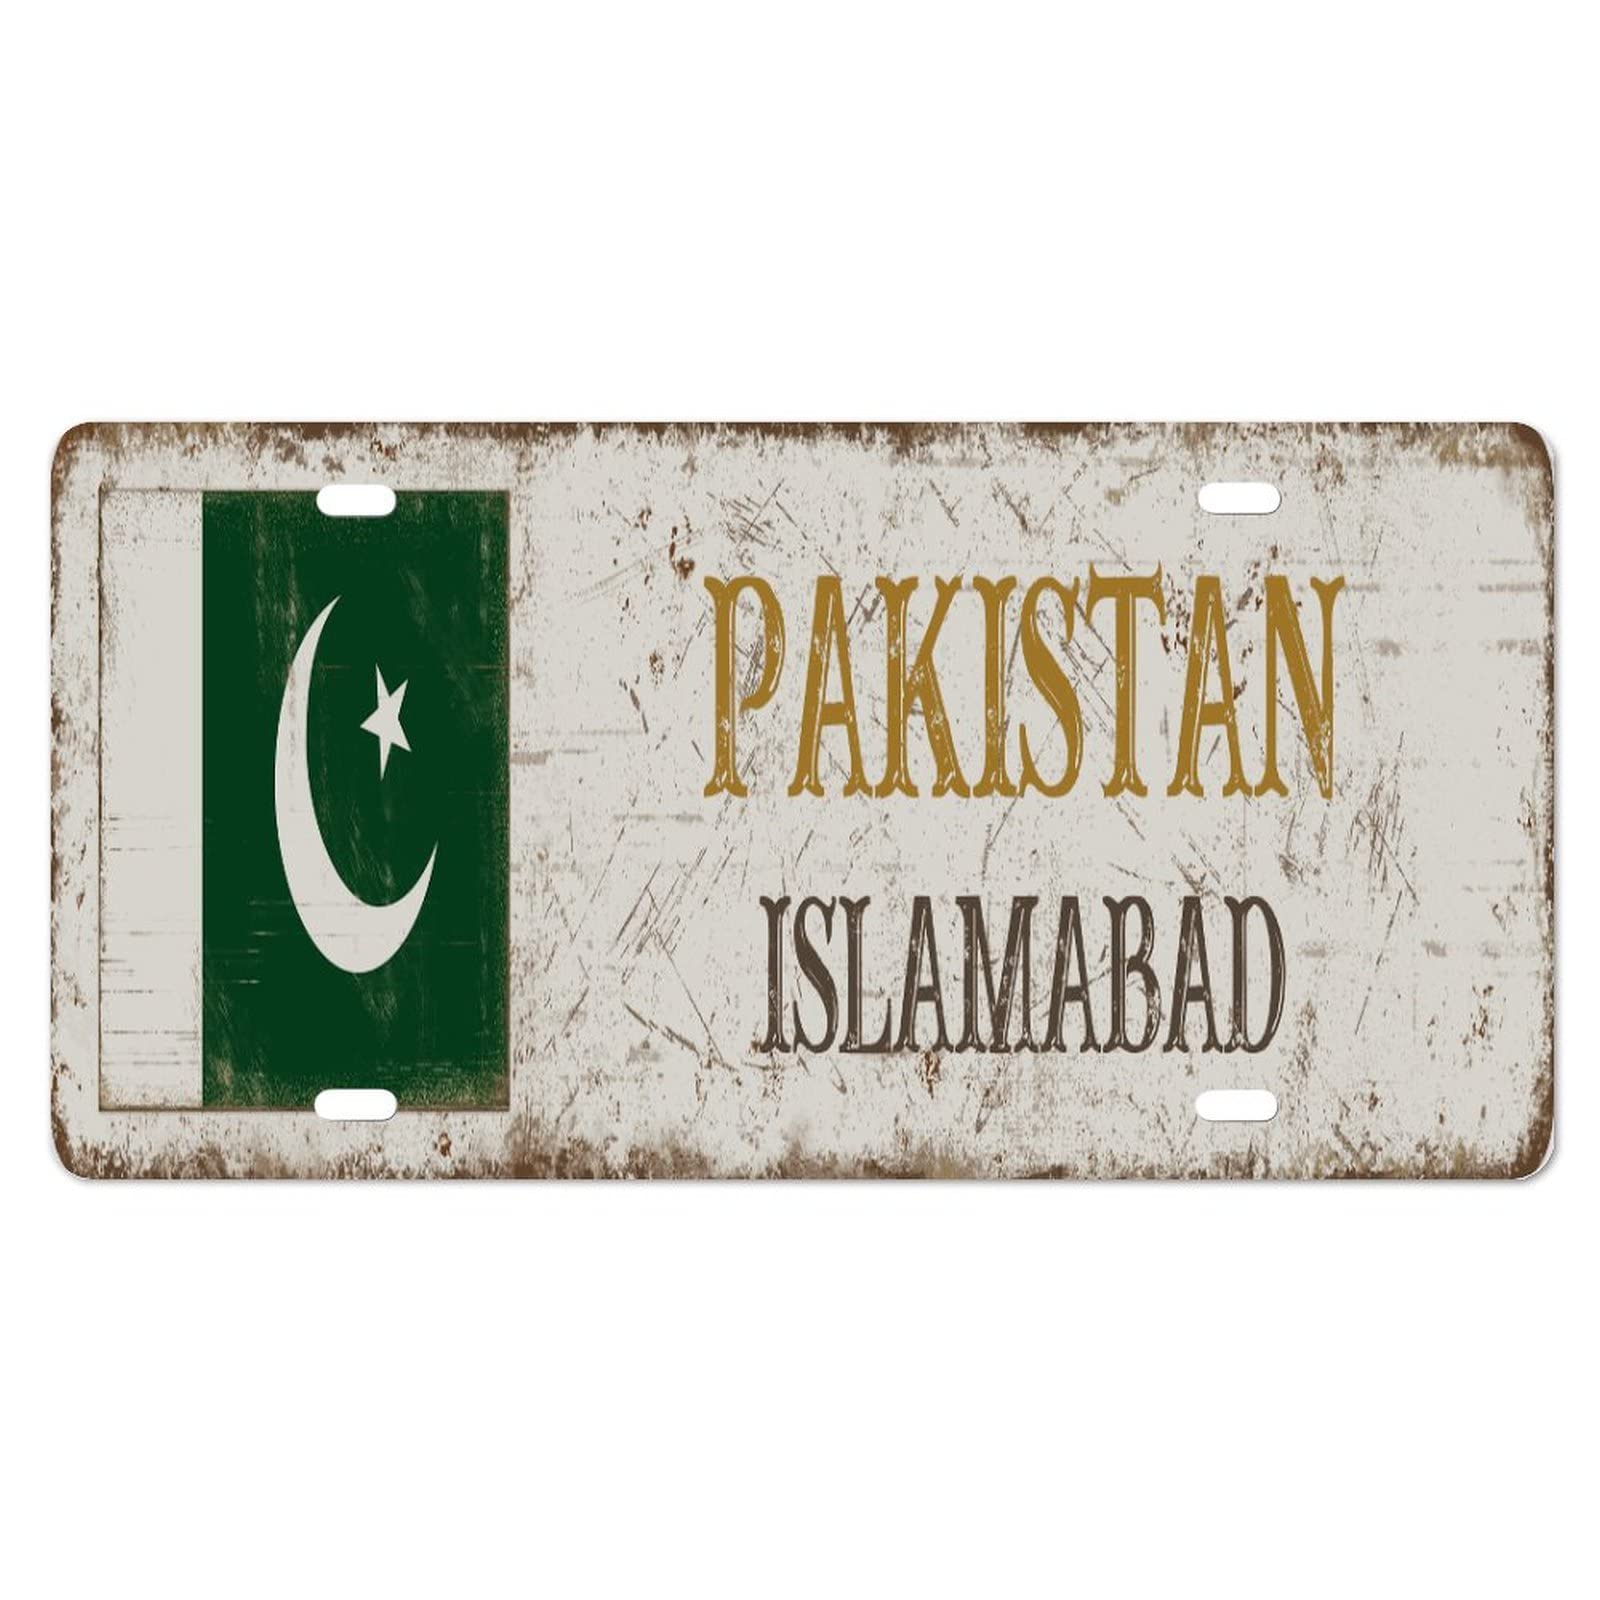 Yelolyio PakistanLicense Plate for Front of Car Size 6x12 Inch Rust-Free Pakistan Islamabad Metal License Plate Pakistan National Flag Aluminum Novelty License Plate Car Tags Gift for New Car von Yelolyio